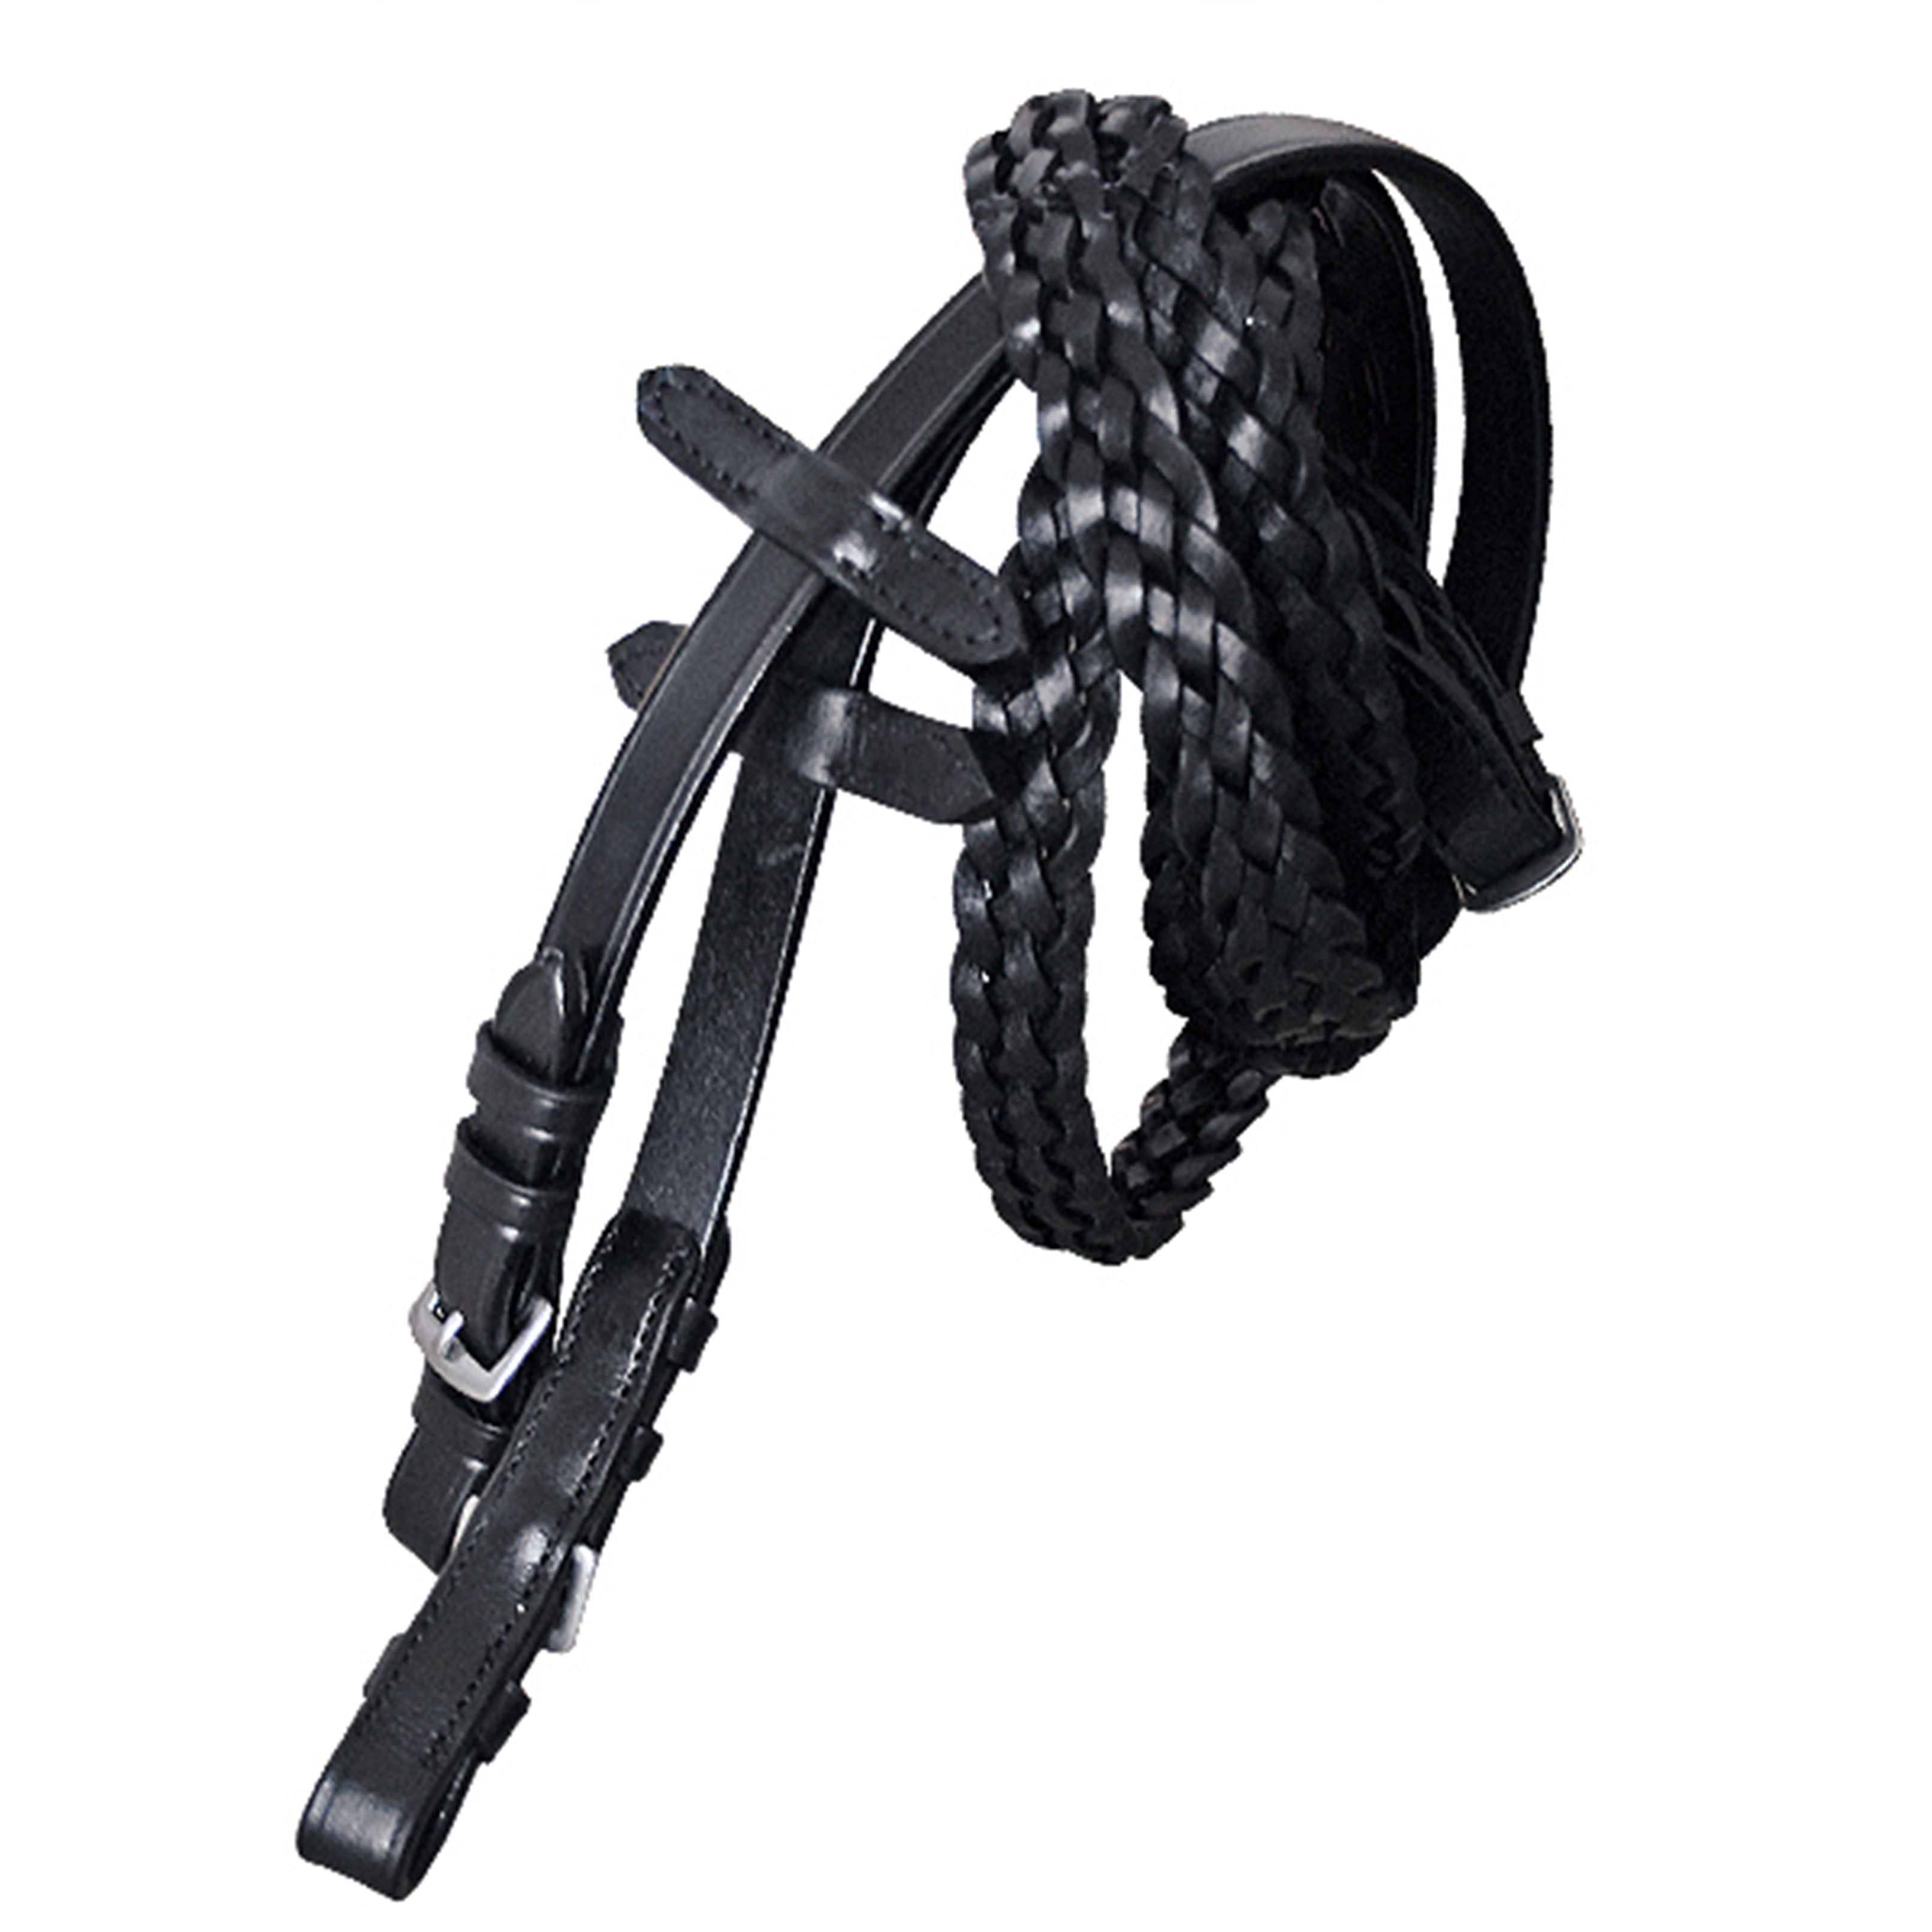  ExionPro Soft Leather Loop Reins with Hand Stops and Martingale  Stoppers, Buckle Fastening